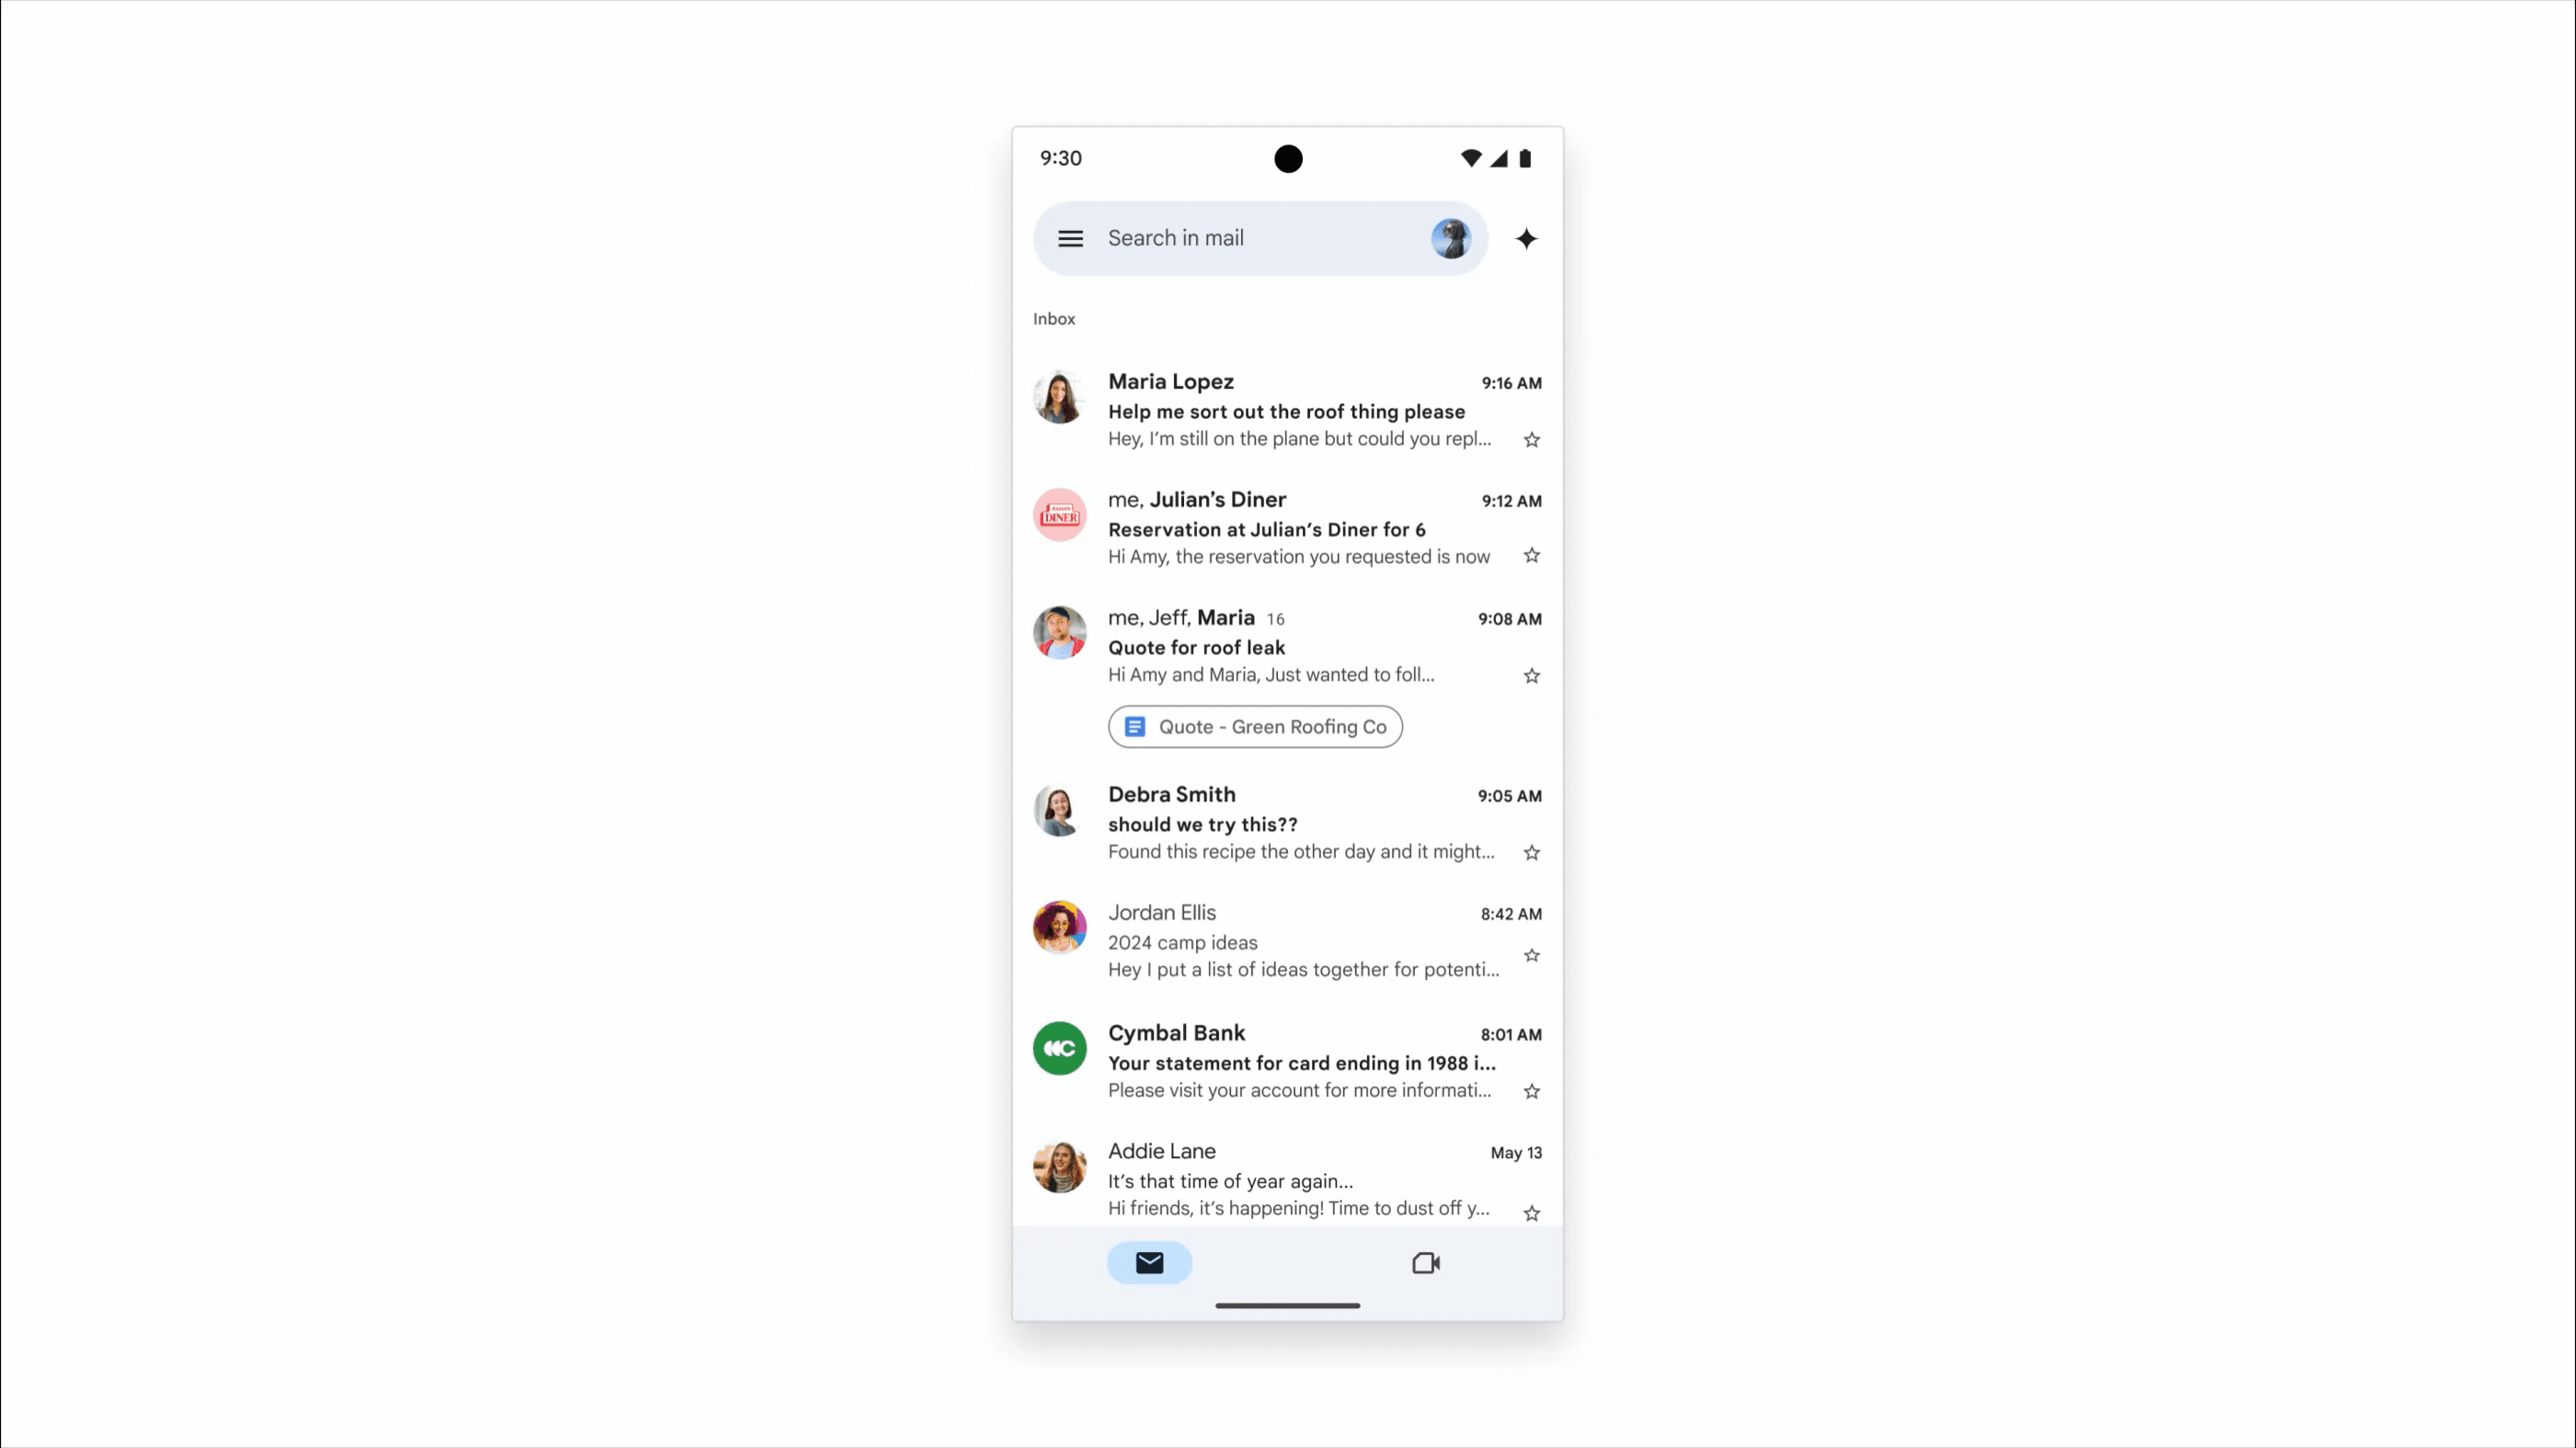 Gemini in the Gmail app gathering the insights from your inbox